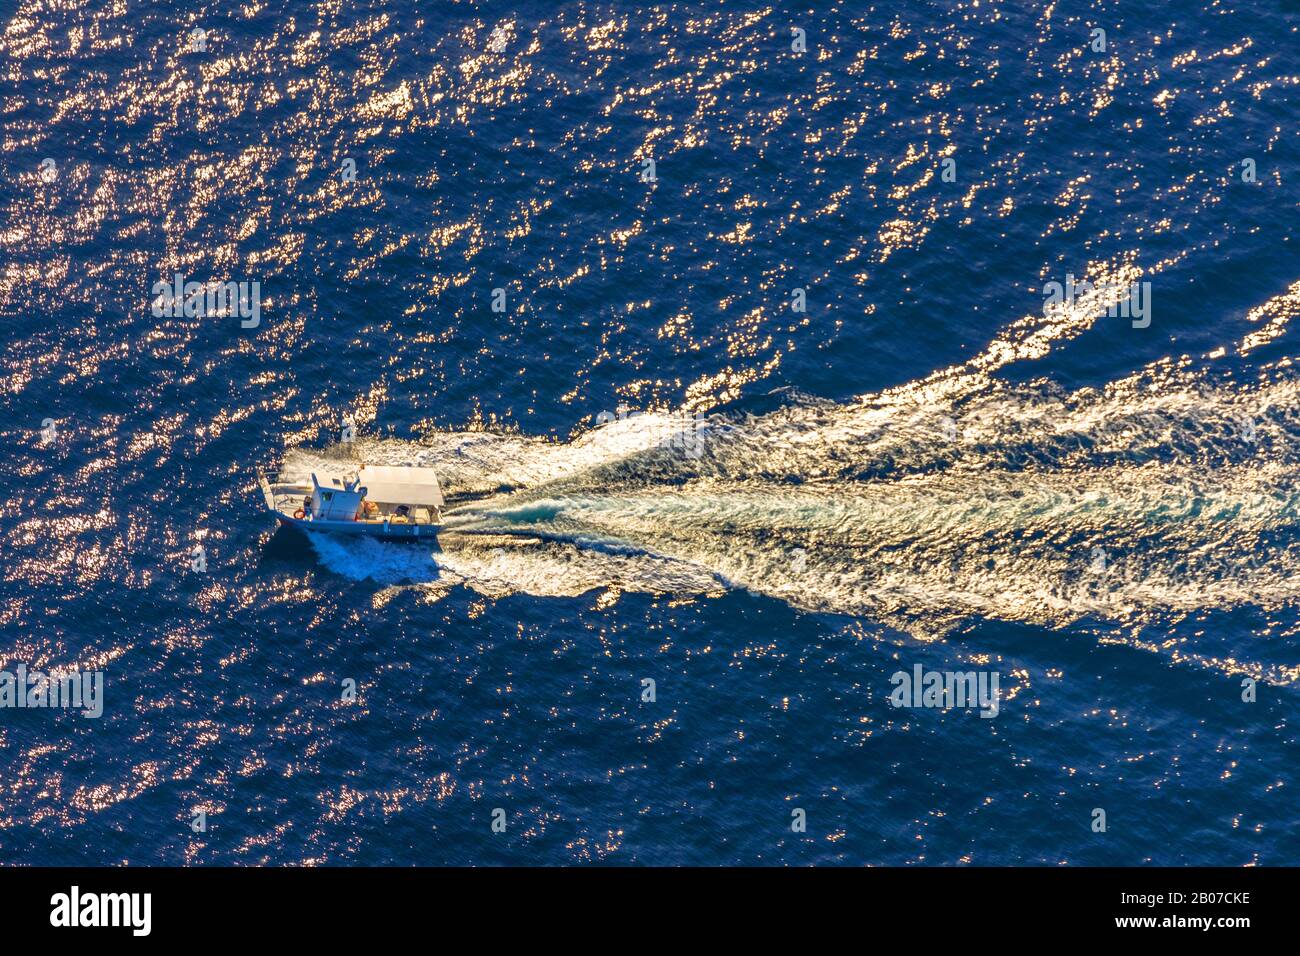 motorboat with trails on the Mediterranian Sea, 09.01.2020, aerial view, Spain, Balearic Islands, Majorca Stock Photo